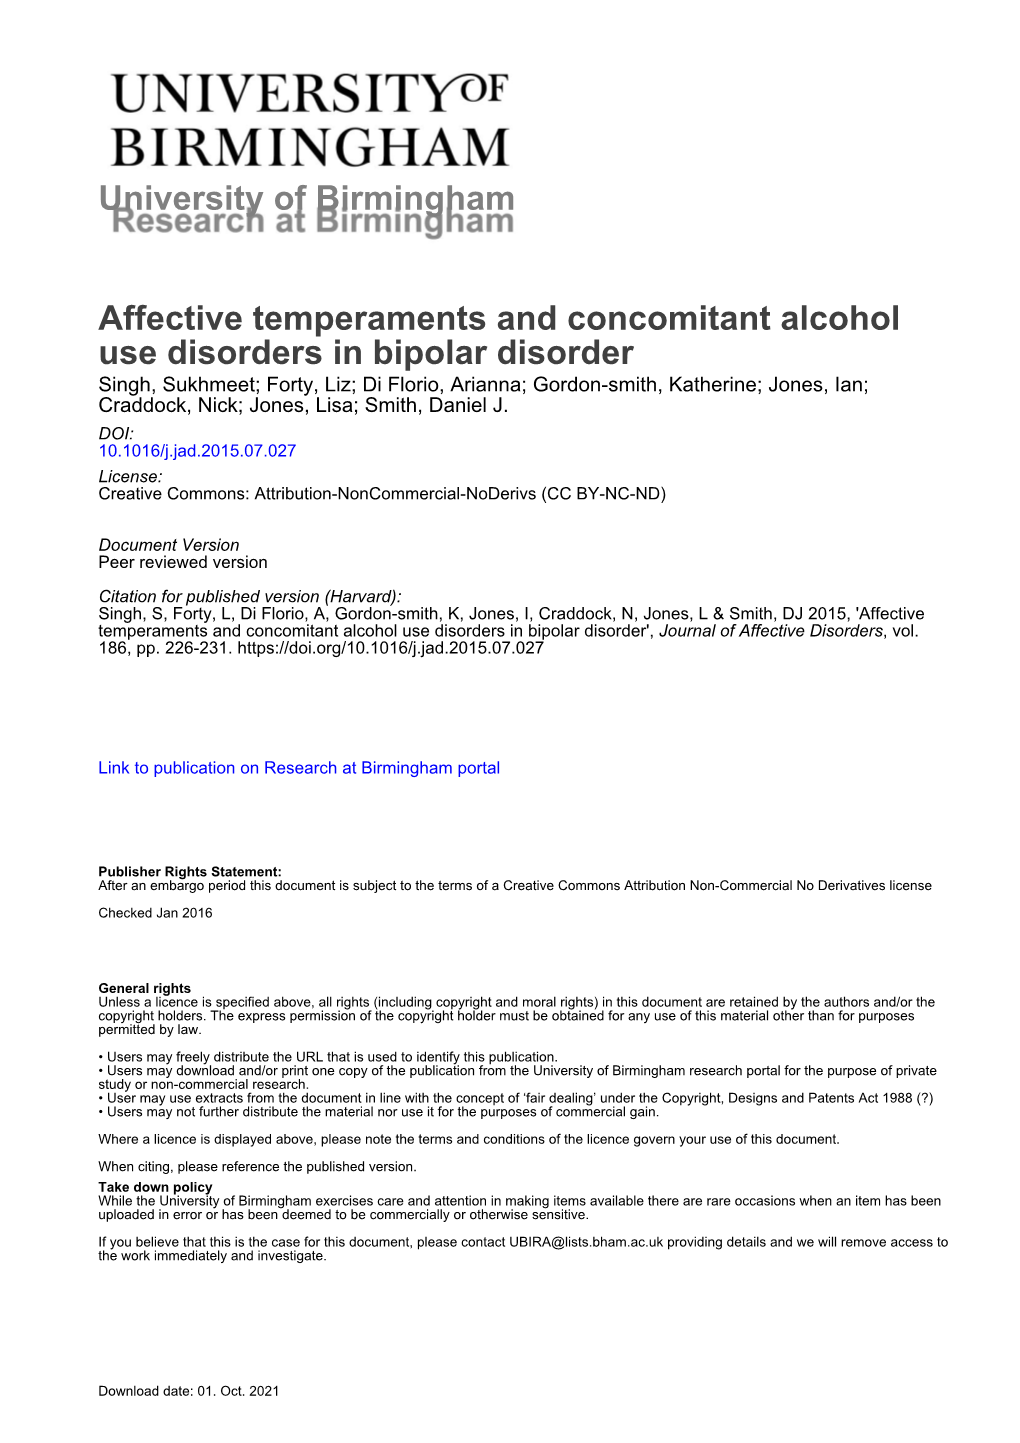 Affective Temperaments and Concomitant Alcohol Use Disorders